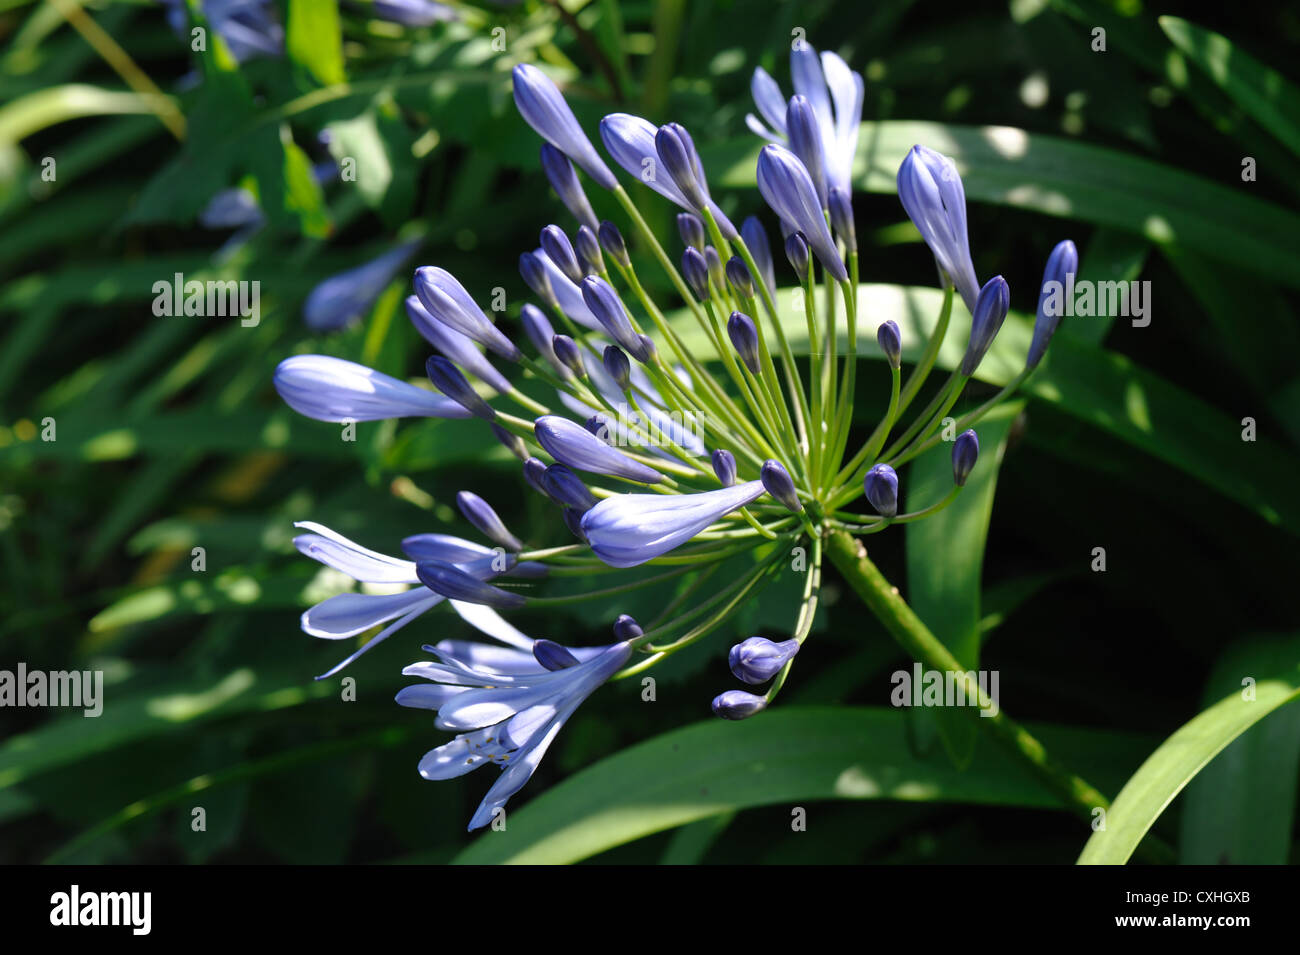 African blue lily (Agapanthus africanus) flowers backlit against a garden background Stock Photo